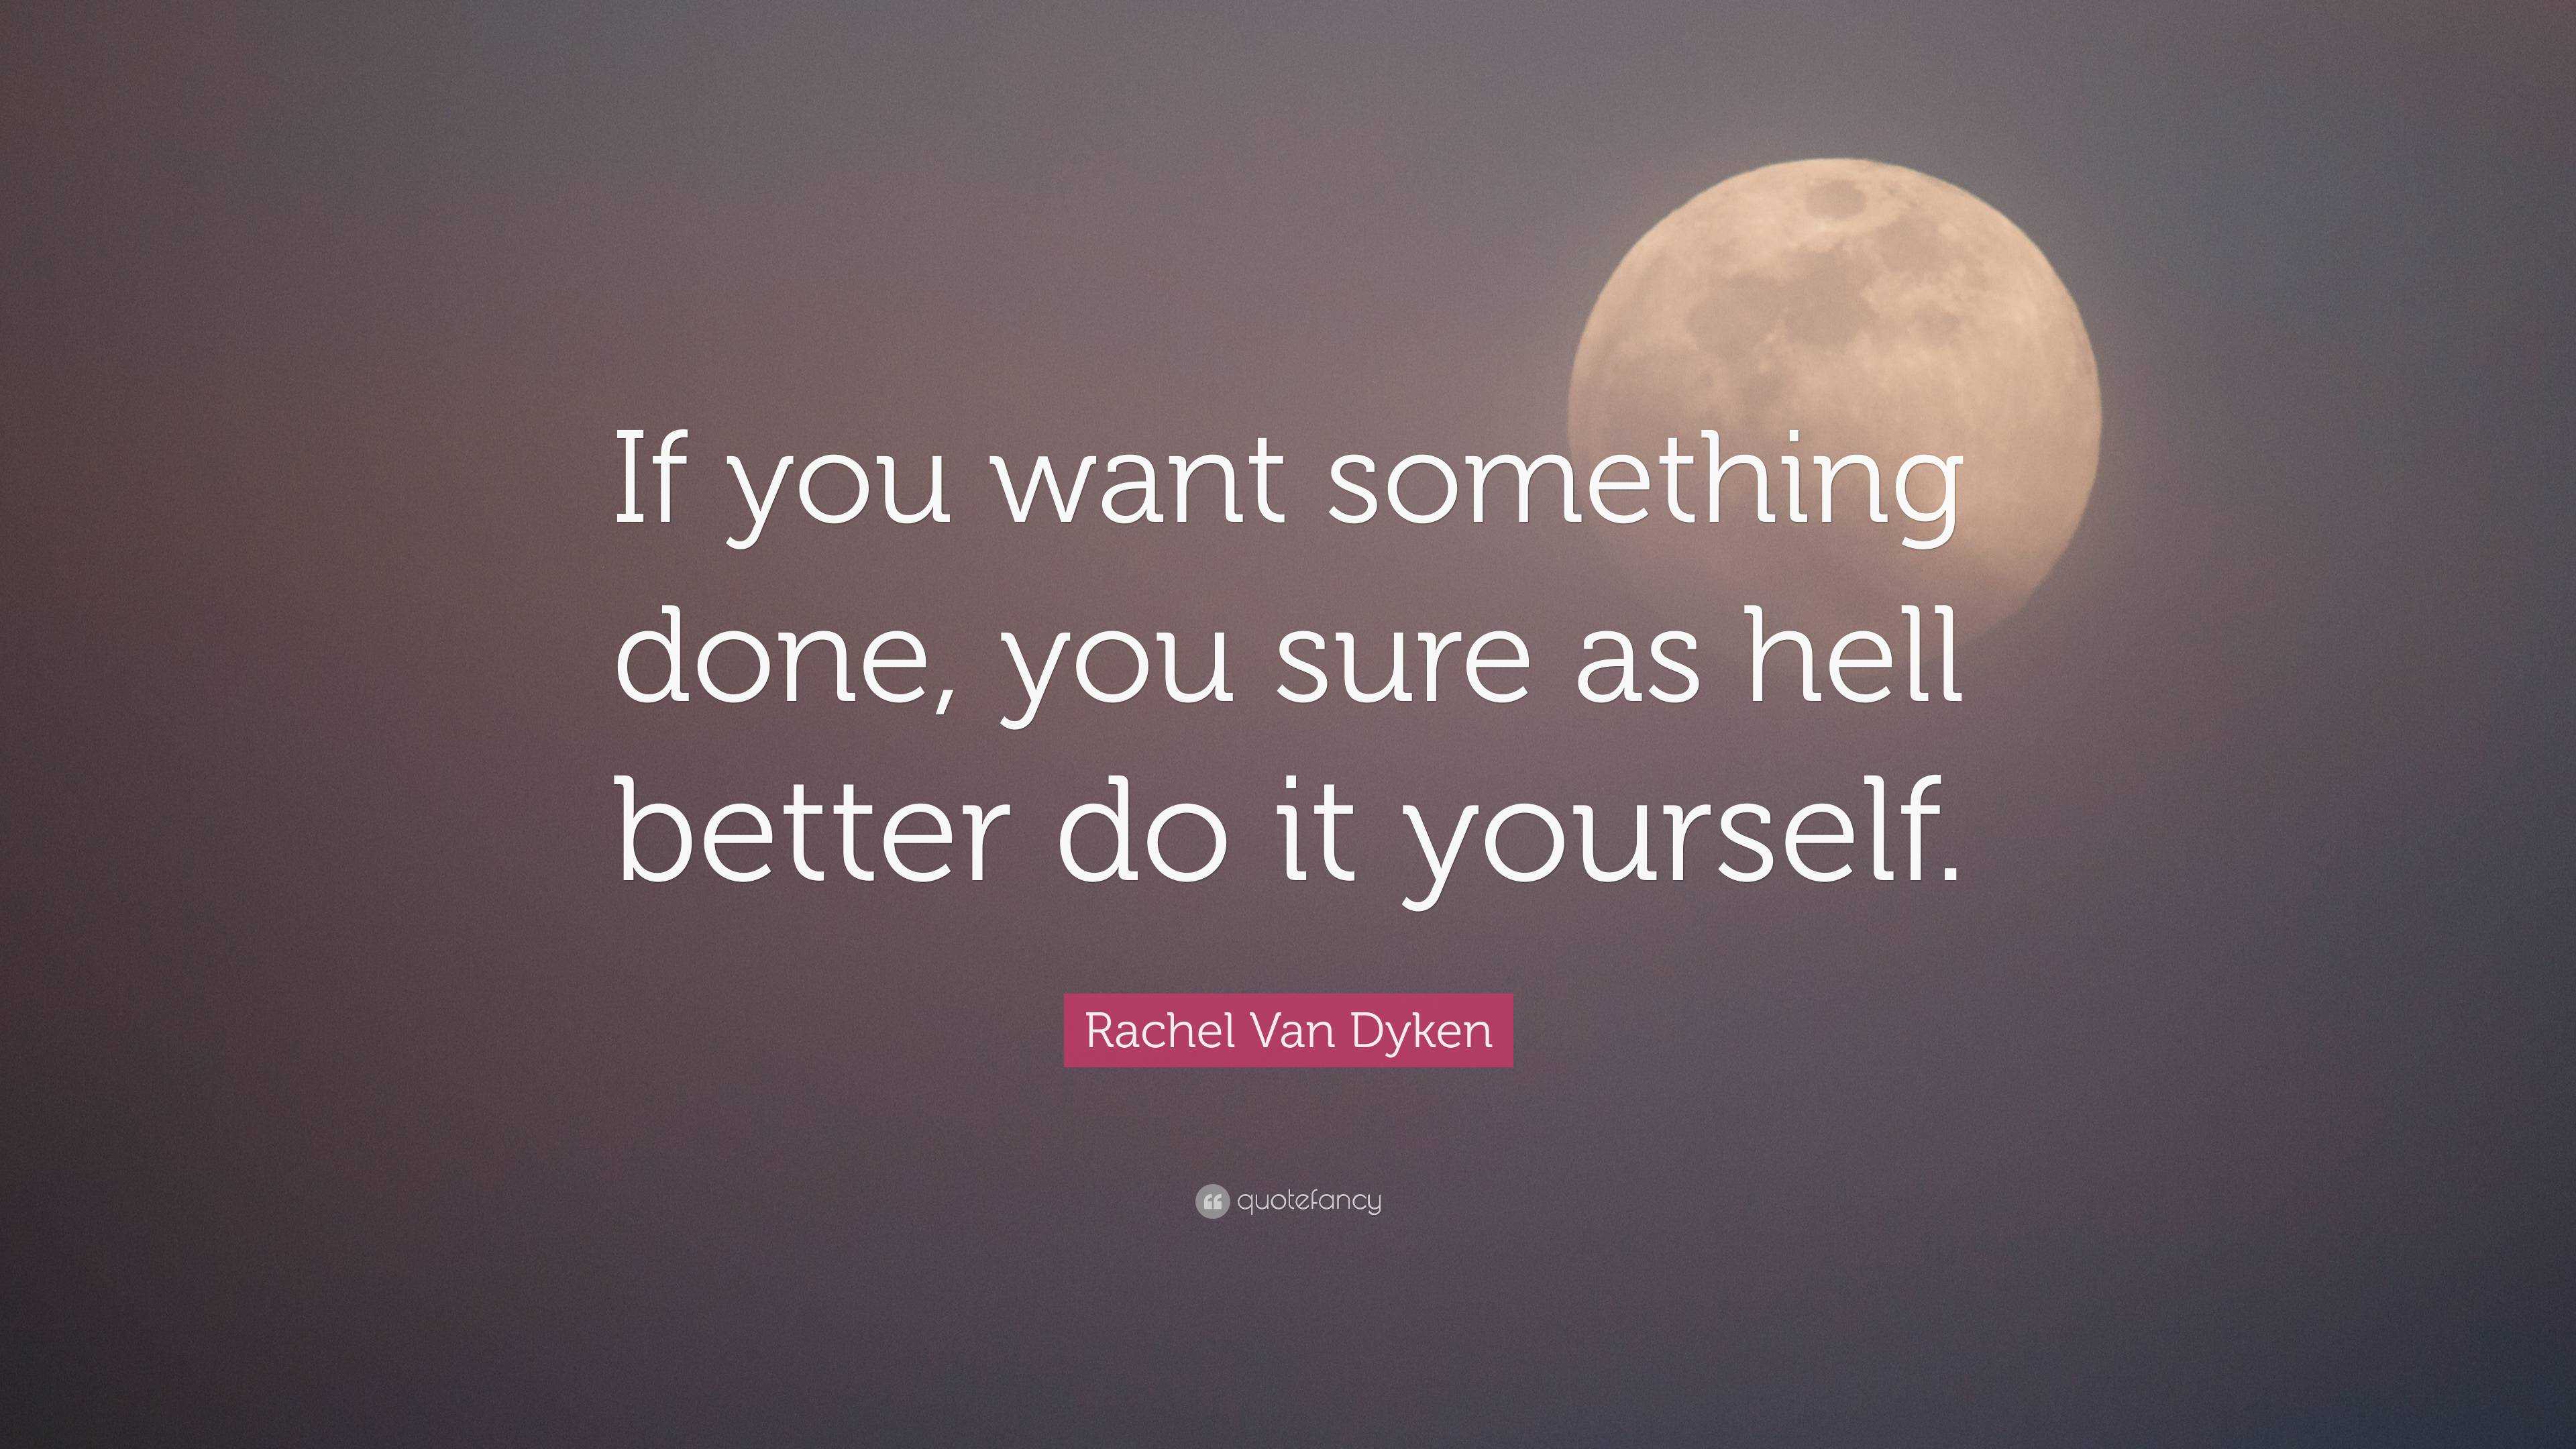 Rachel Van Dyken Quote: “If you want something done, you sure as hell ...